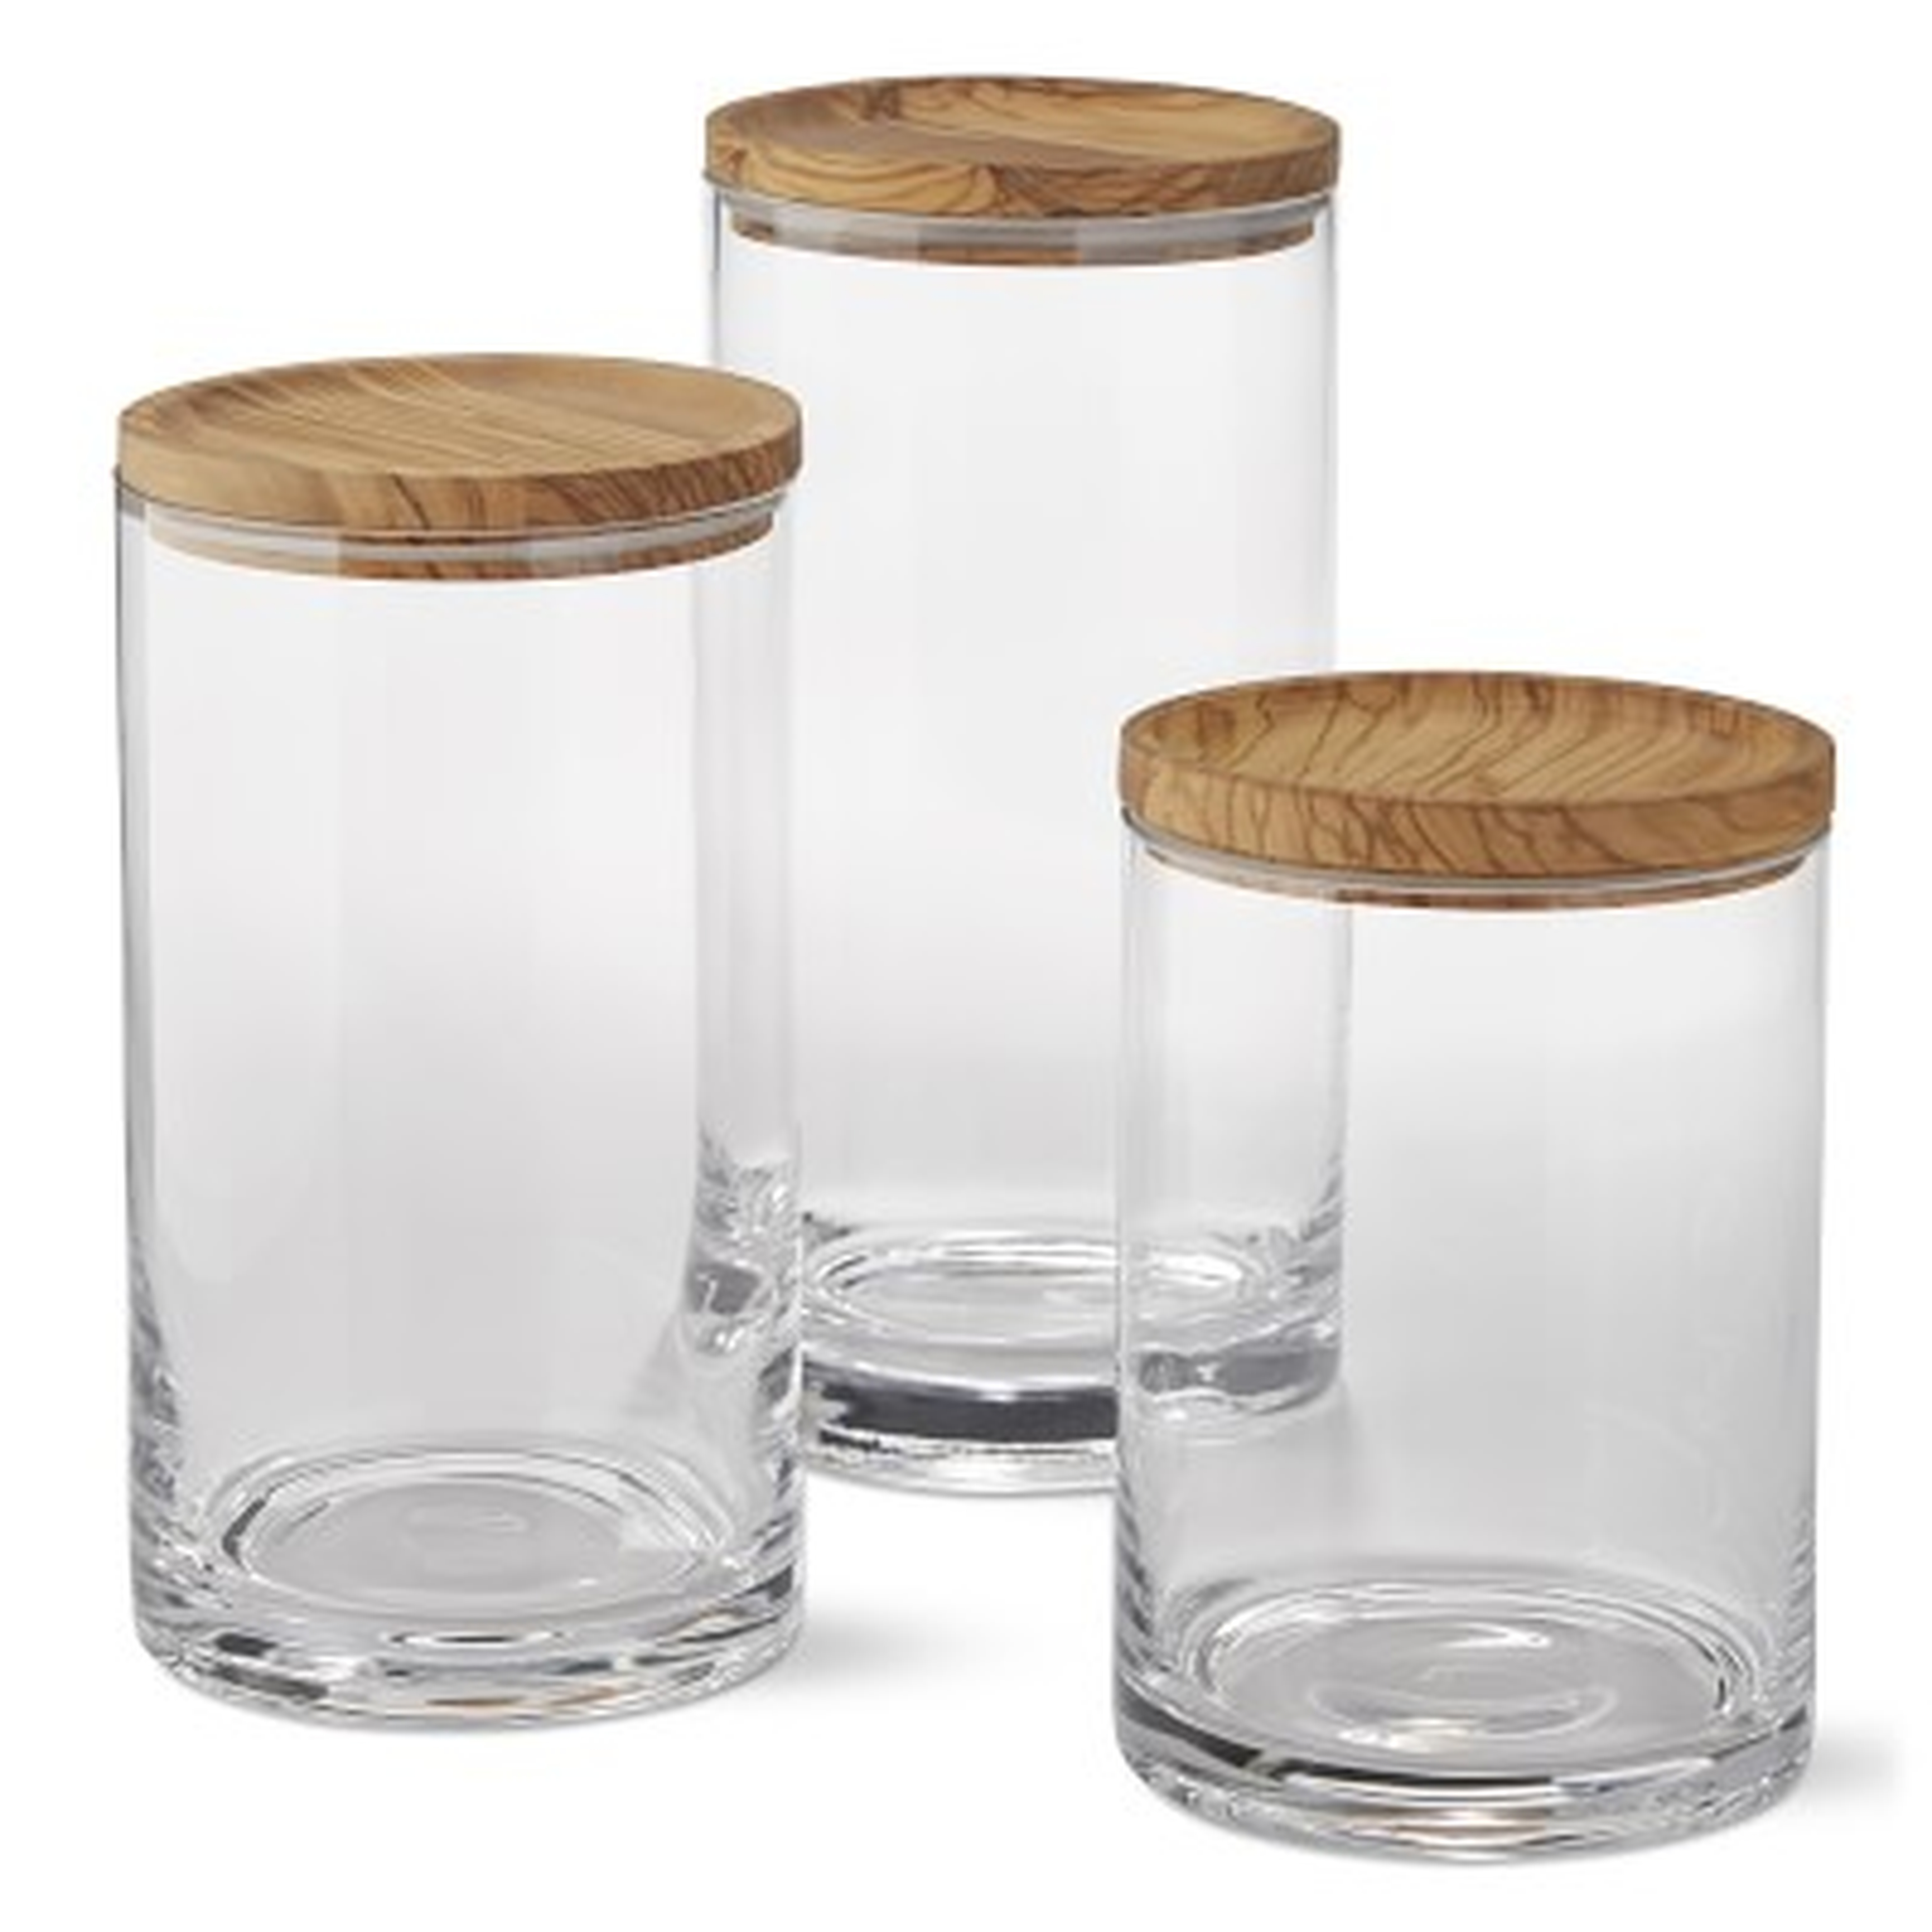 Olivewood Canisters, Set of 3 - Williams Sonoma